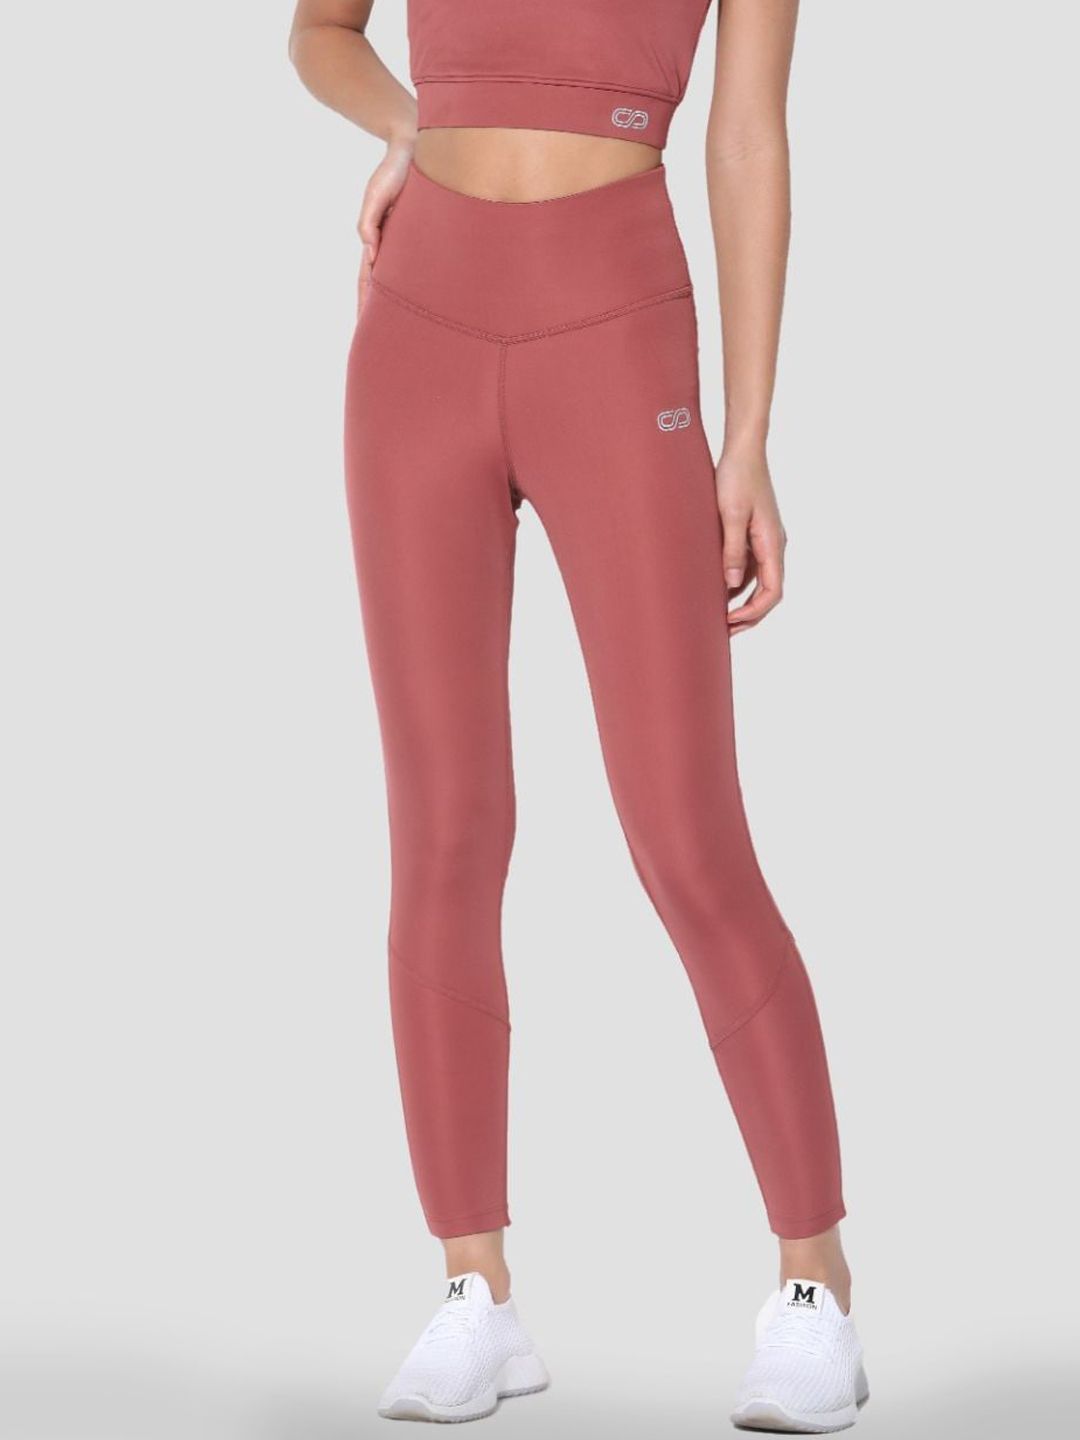 Silvertraq Women Dusty Pink High-Waist Dry-Fit Tights Price in India